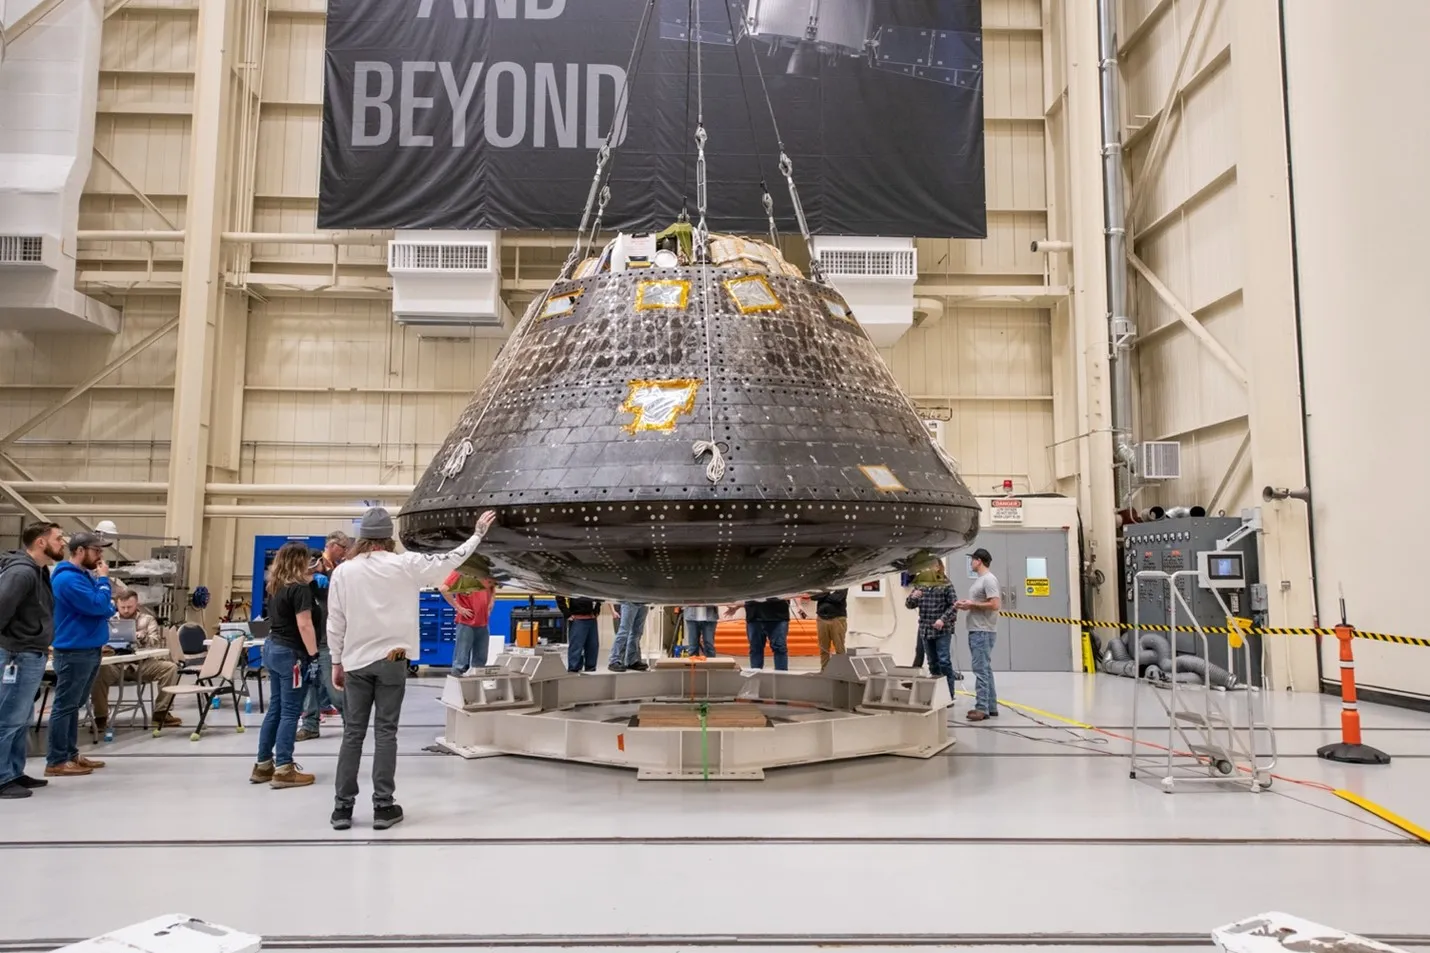 Inside the high-bay assembly area in the Space Environments Complex at NASA's Neil Armstrong Test Facility, the charred Orion capsule from Artemis I is hoisted about four feet above the round white metal framing that it will be tested in. Several engineers and technicians wearing jeans, casual shirts, and work boots surround the capsule.